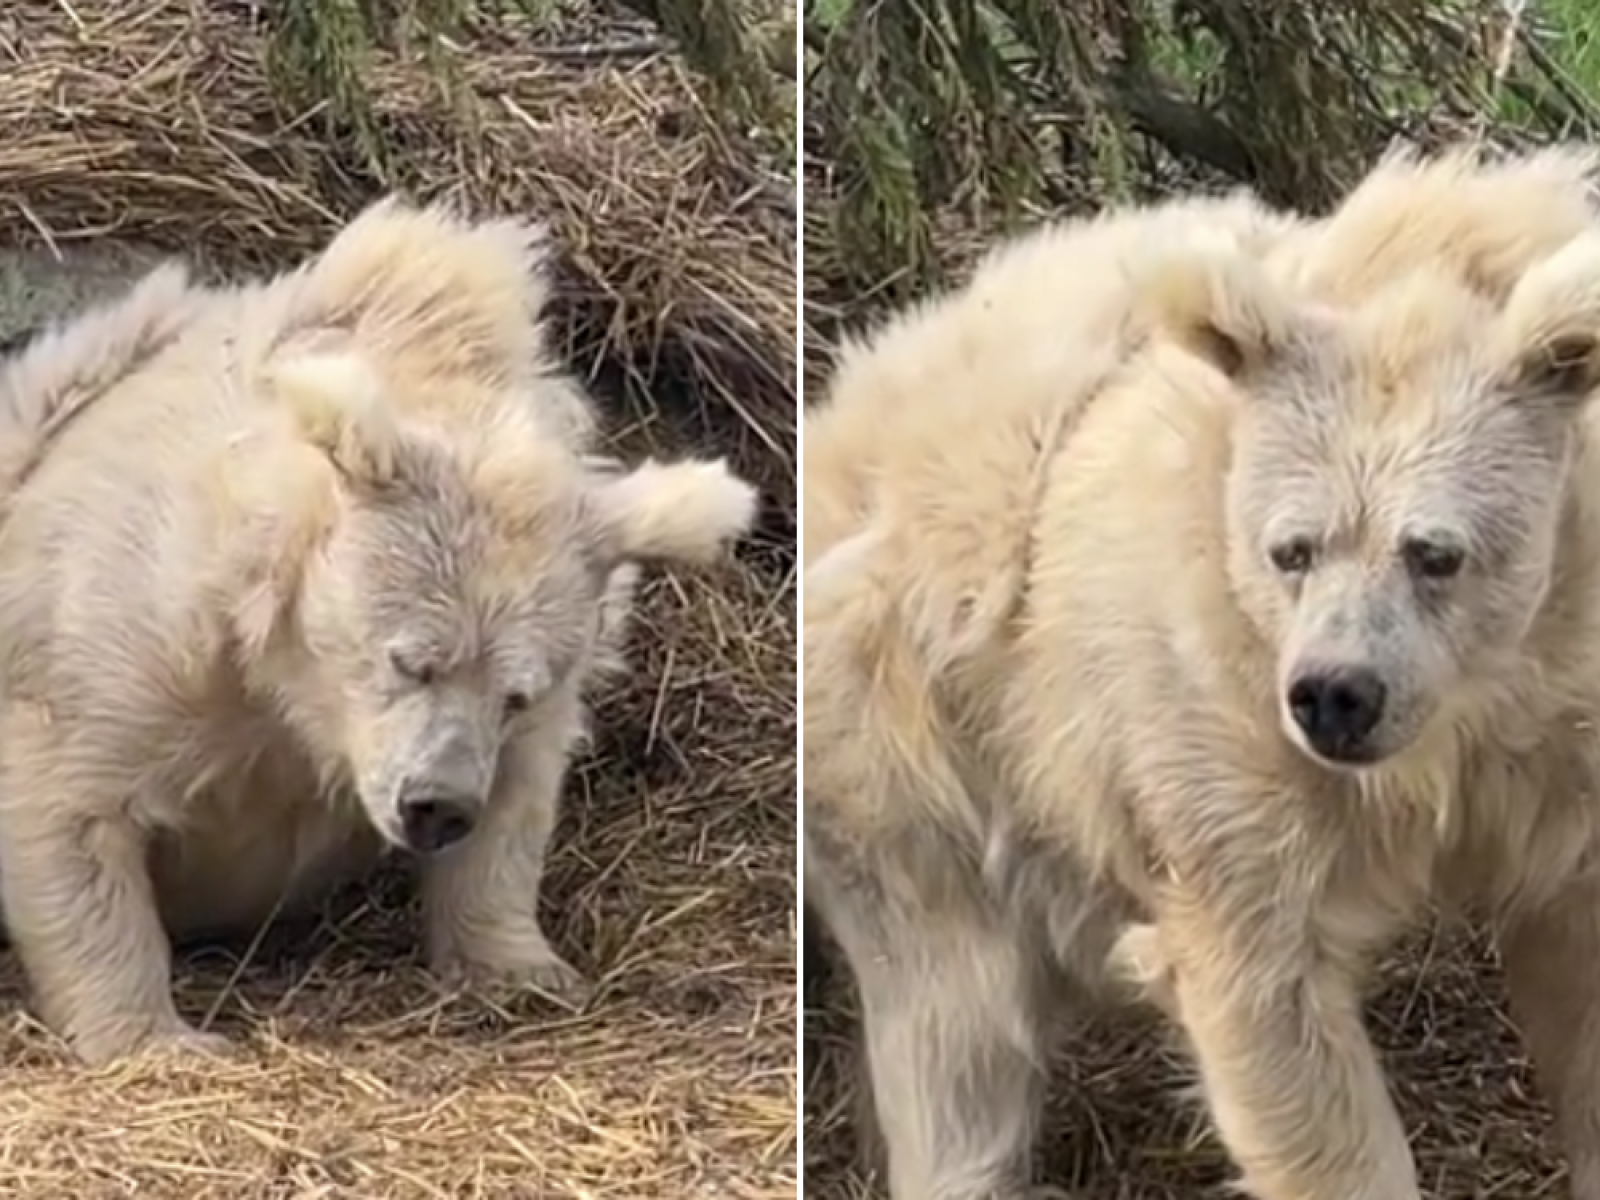 Sleepy Bear Emerges From Den In Very Relatable Video: 'Me On A Monday'